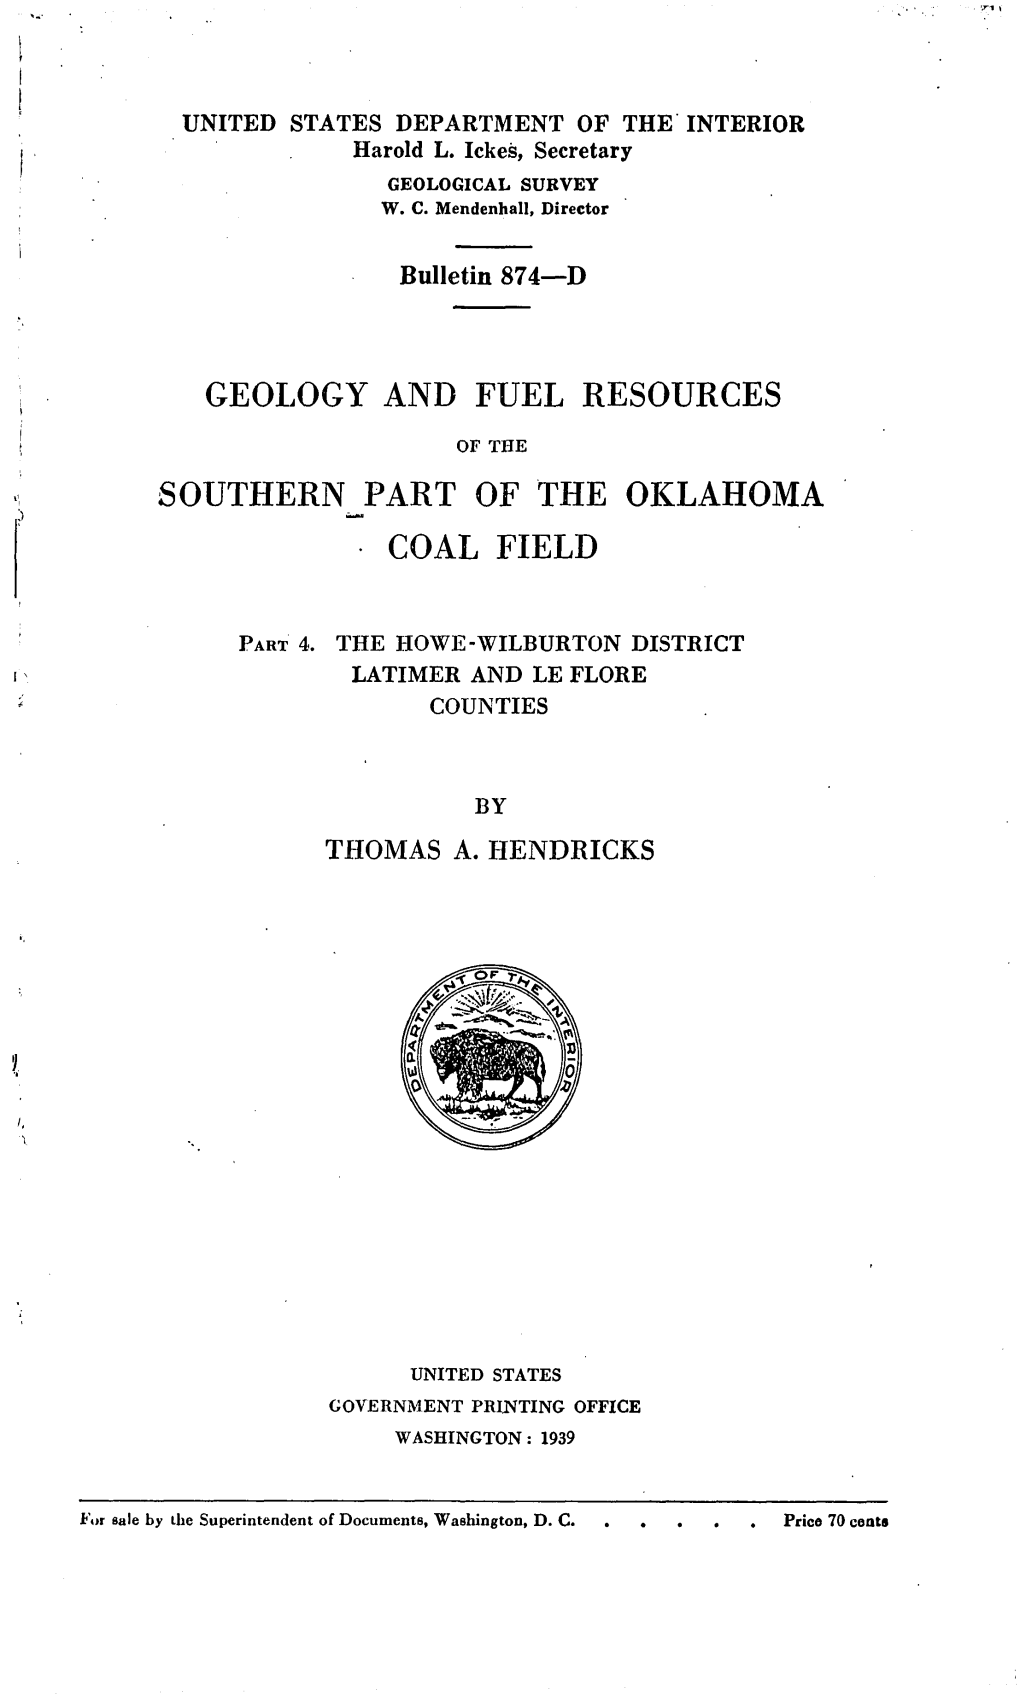 Geology and Fuel Resources